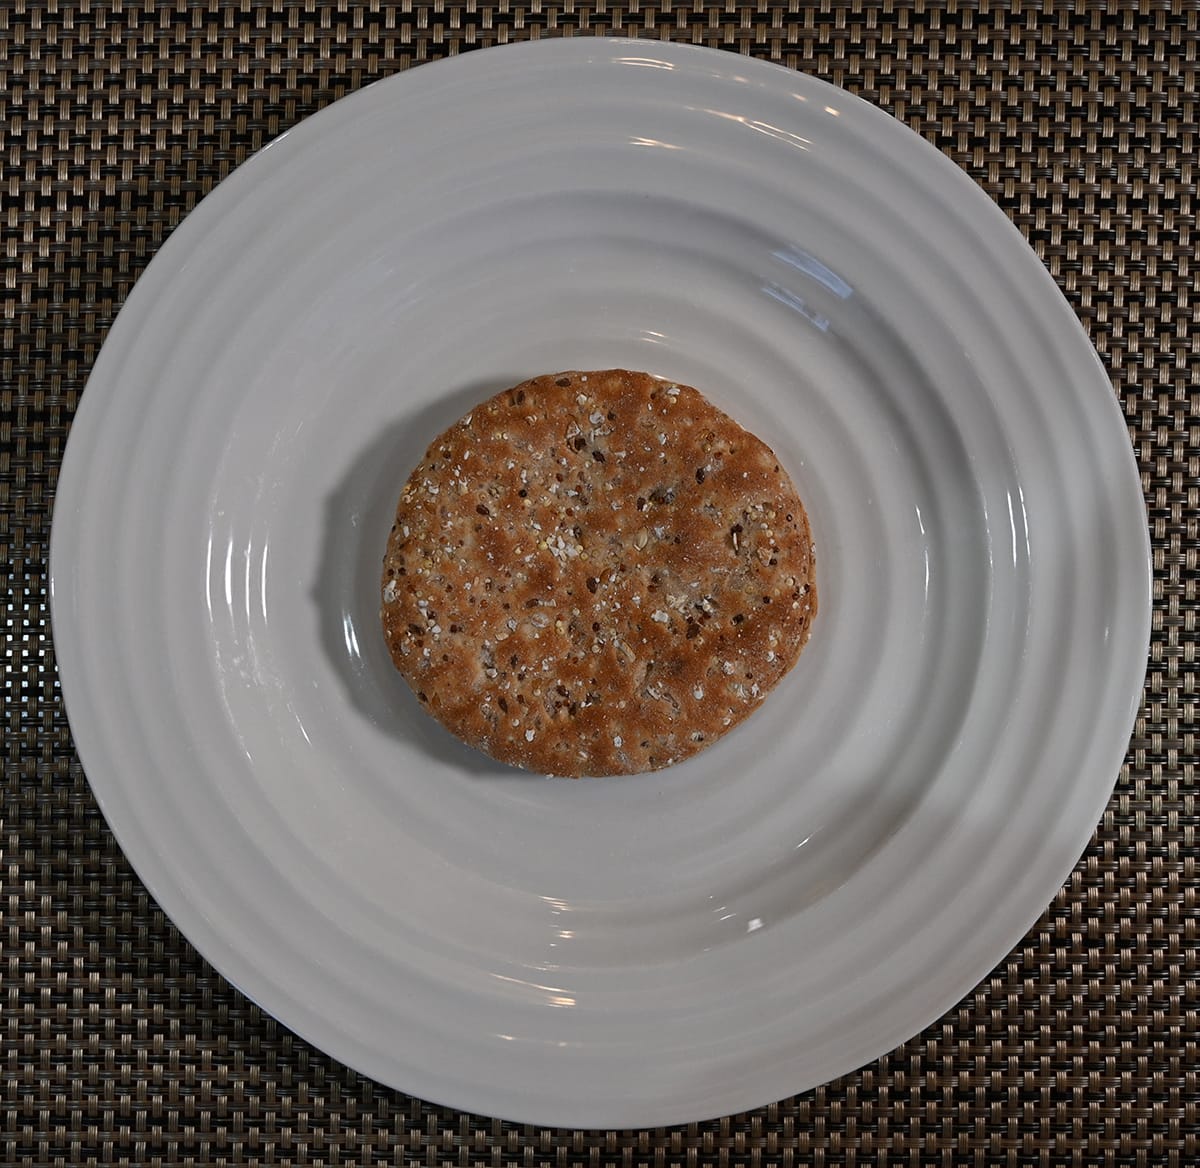 Top down image of one sandwich thin served on a white plate.